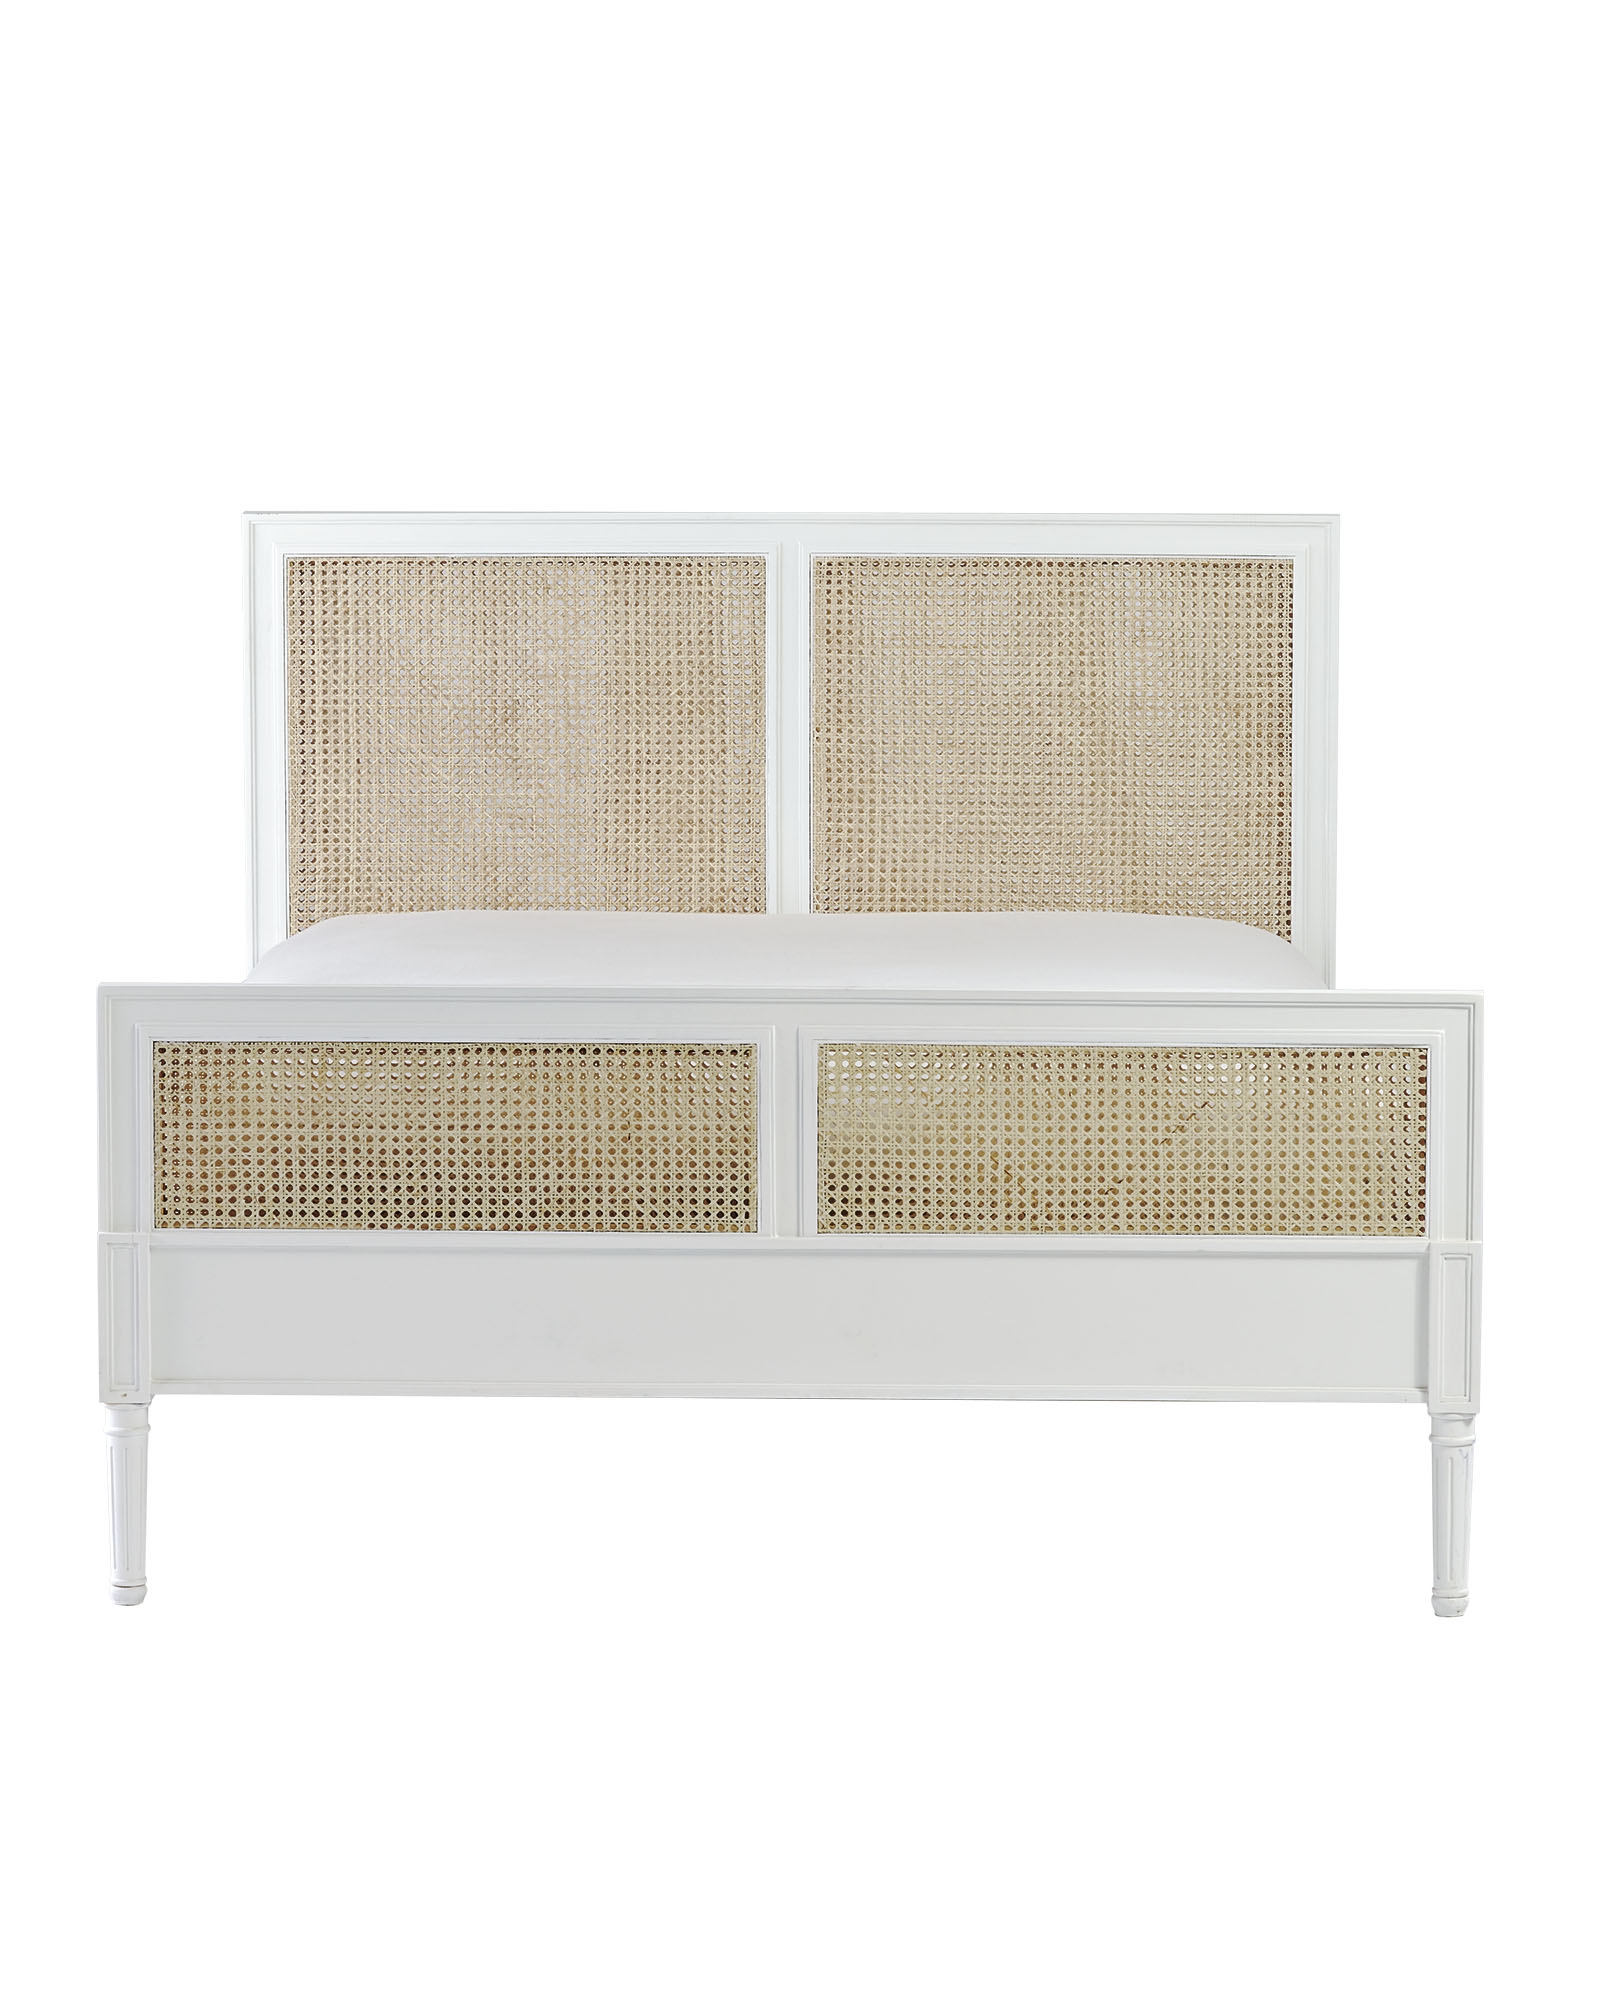 Harbour Cane King Bed - White - Image 2